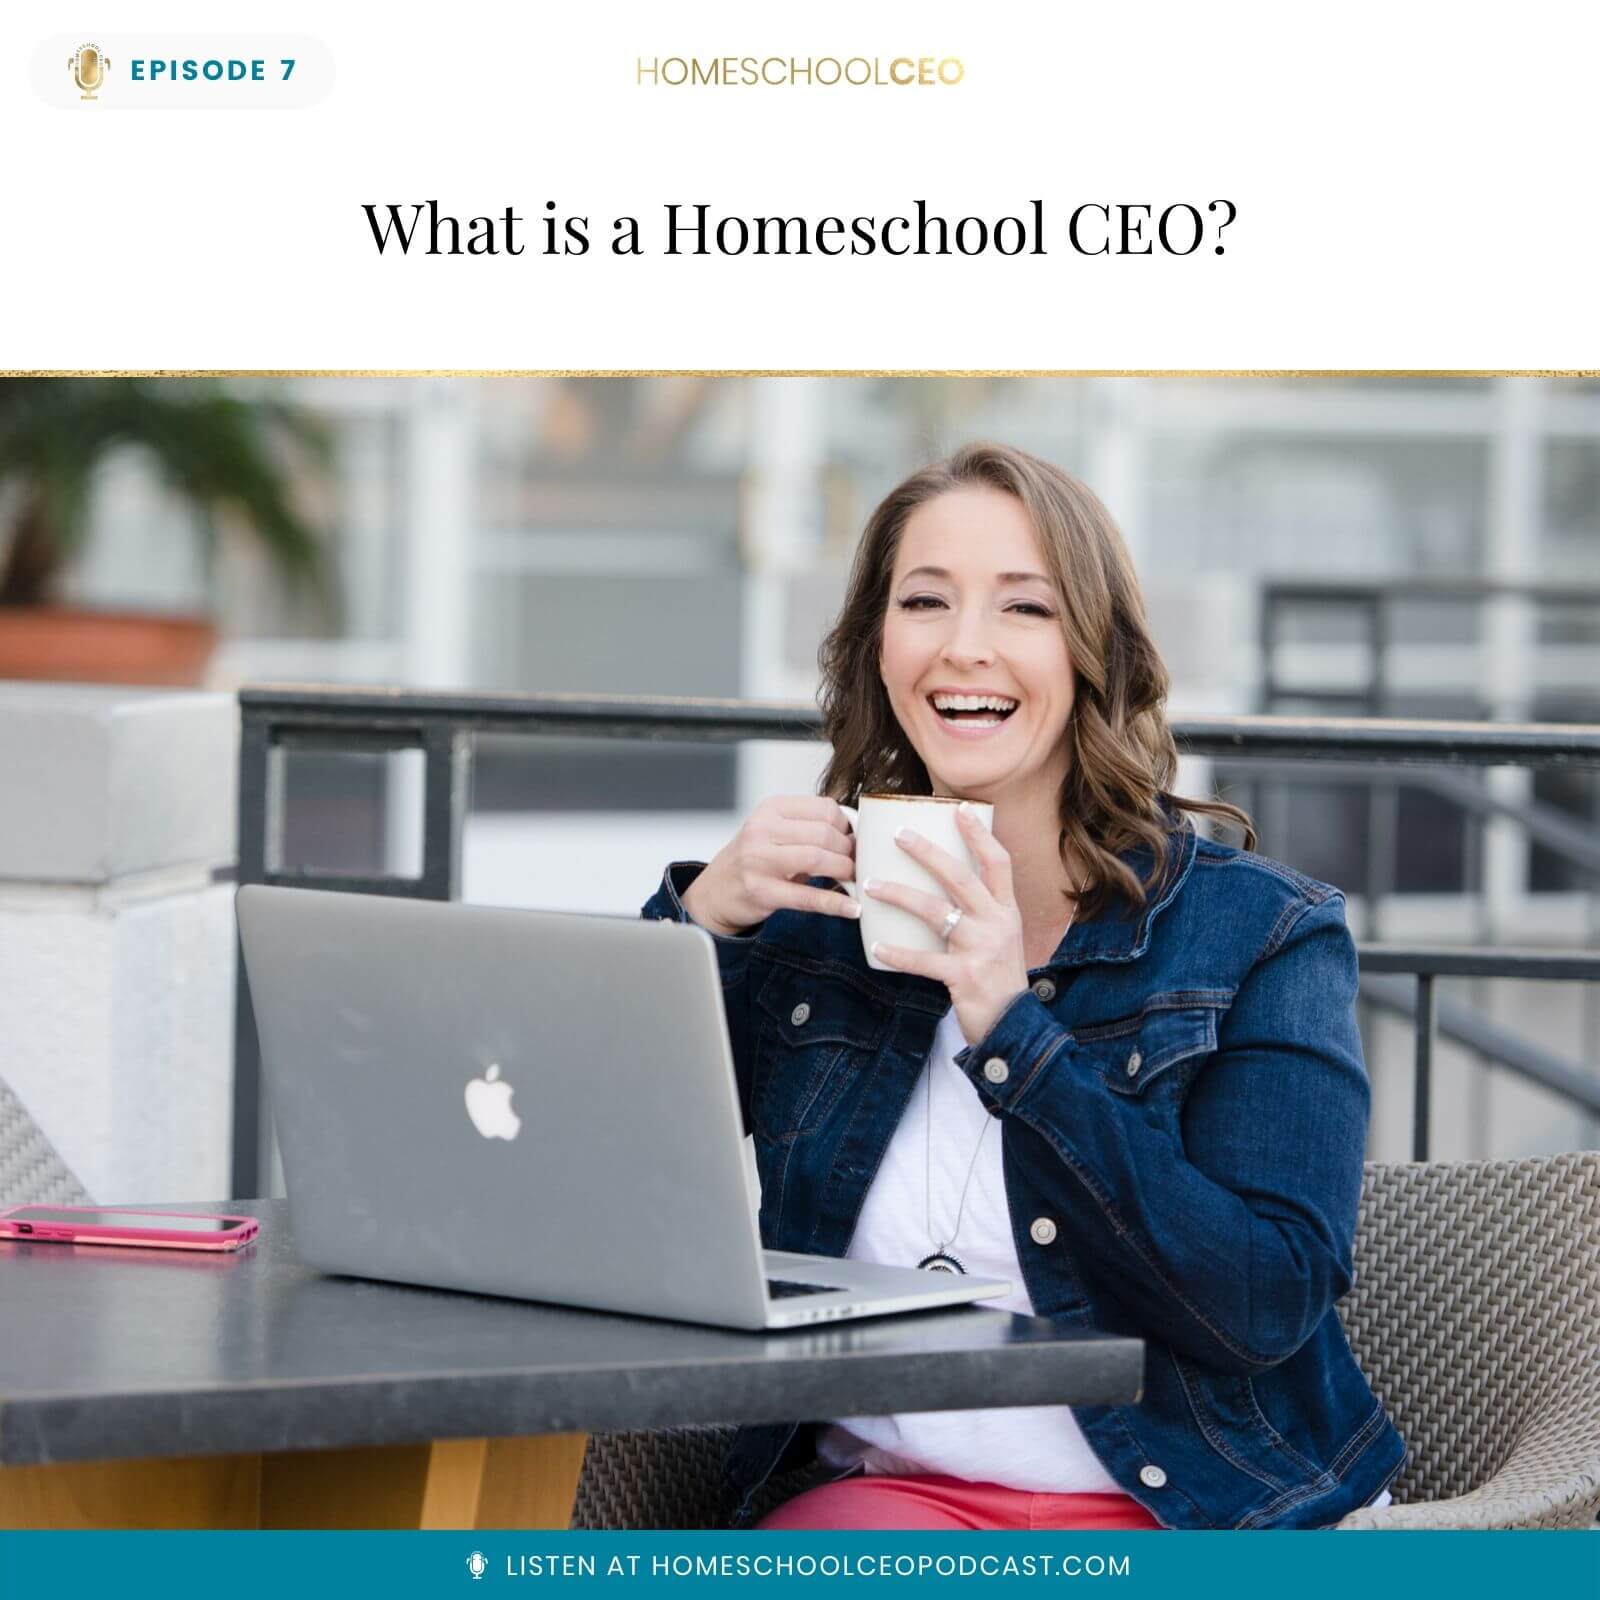 Episode 7 – What is a Homeschool CEO? with Jen Myers